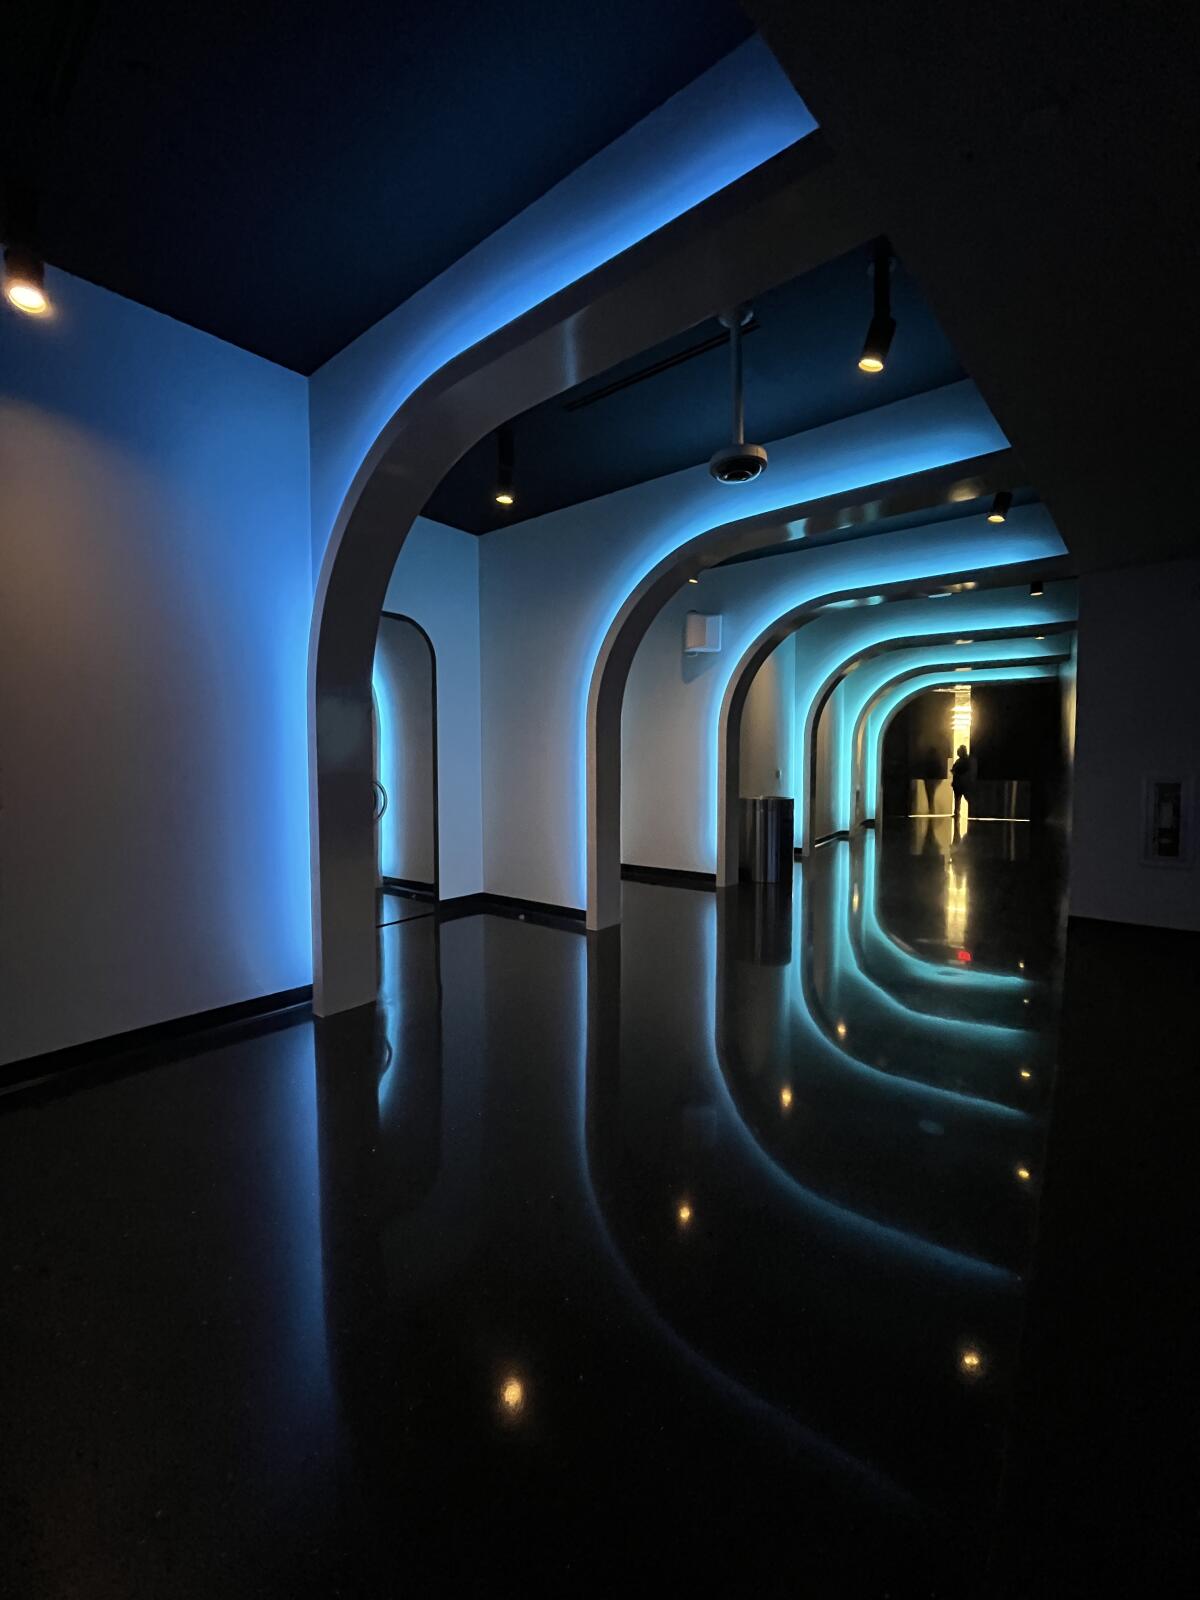 A person opens a door at the end of a hallway trimmed in blue neon light that is reflected on the shiny black floors.